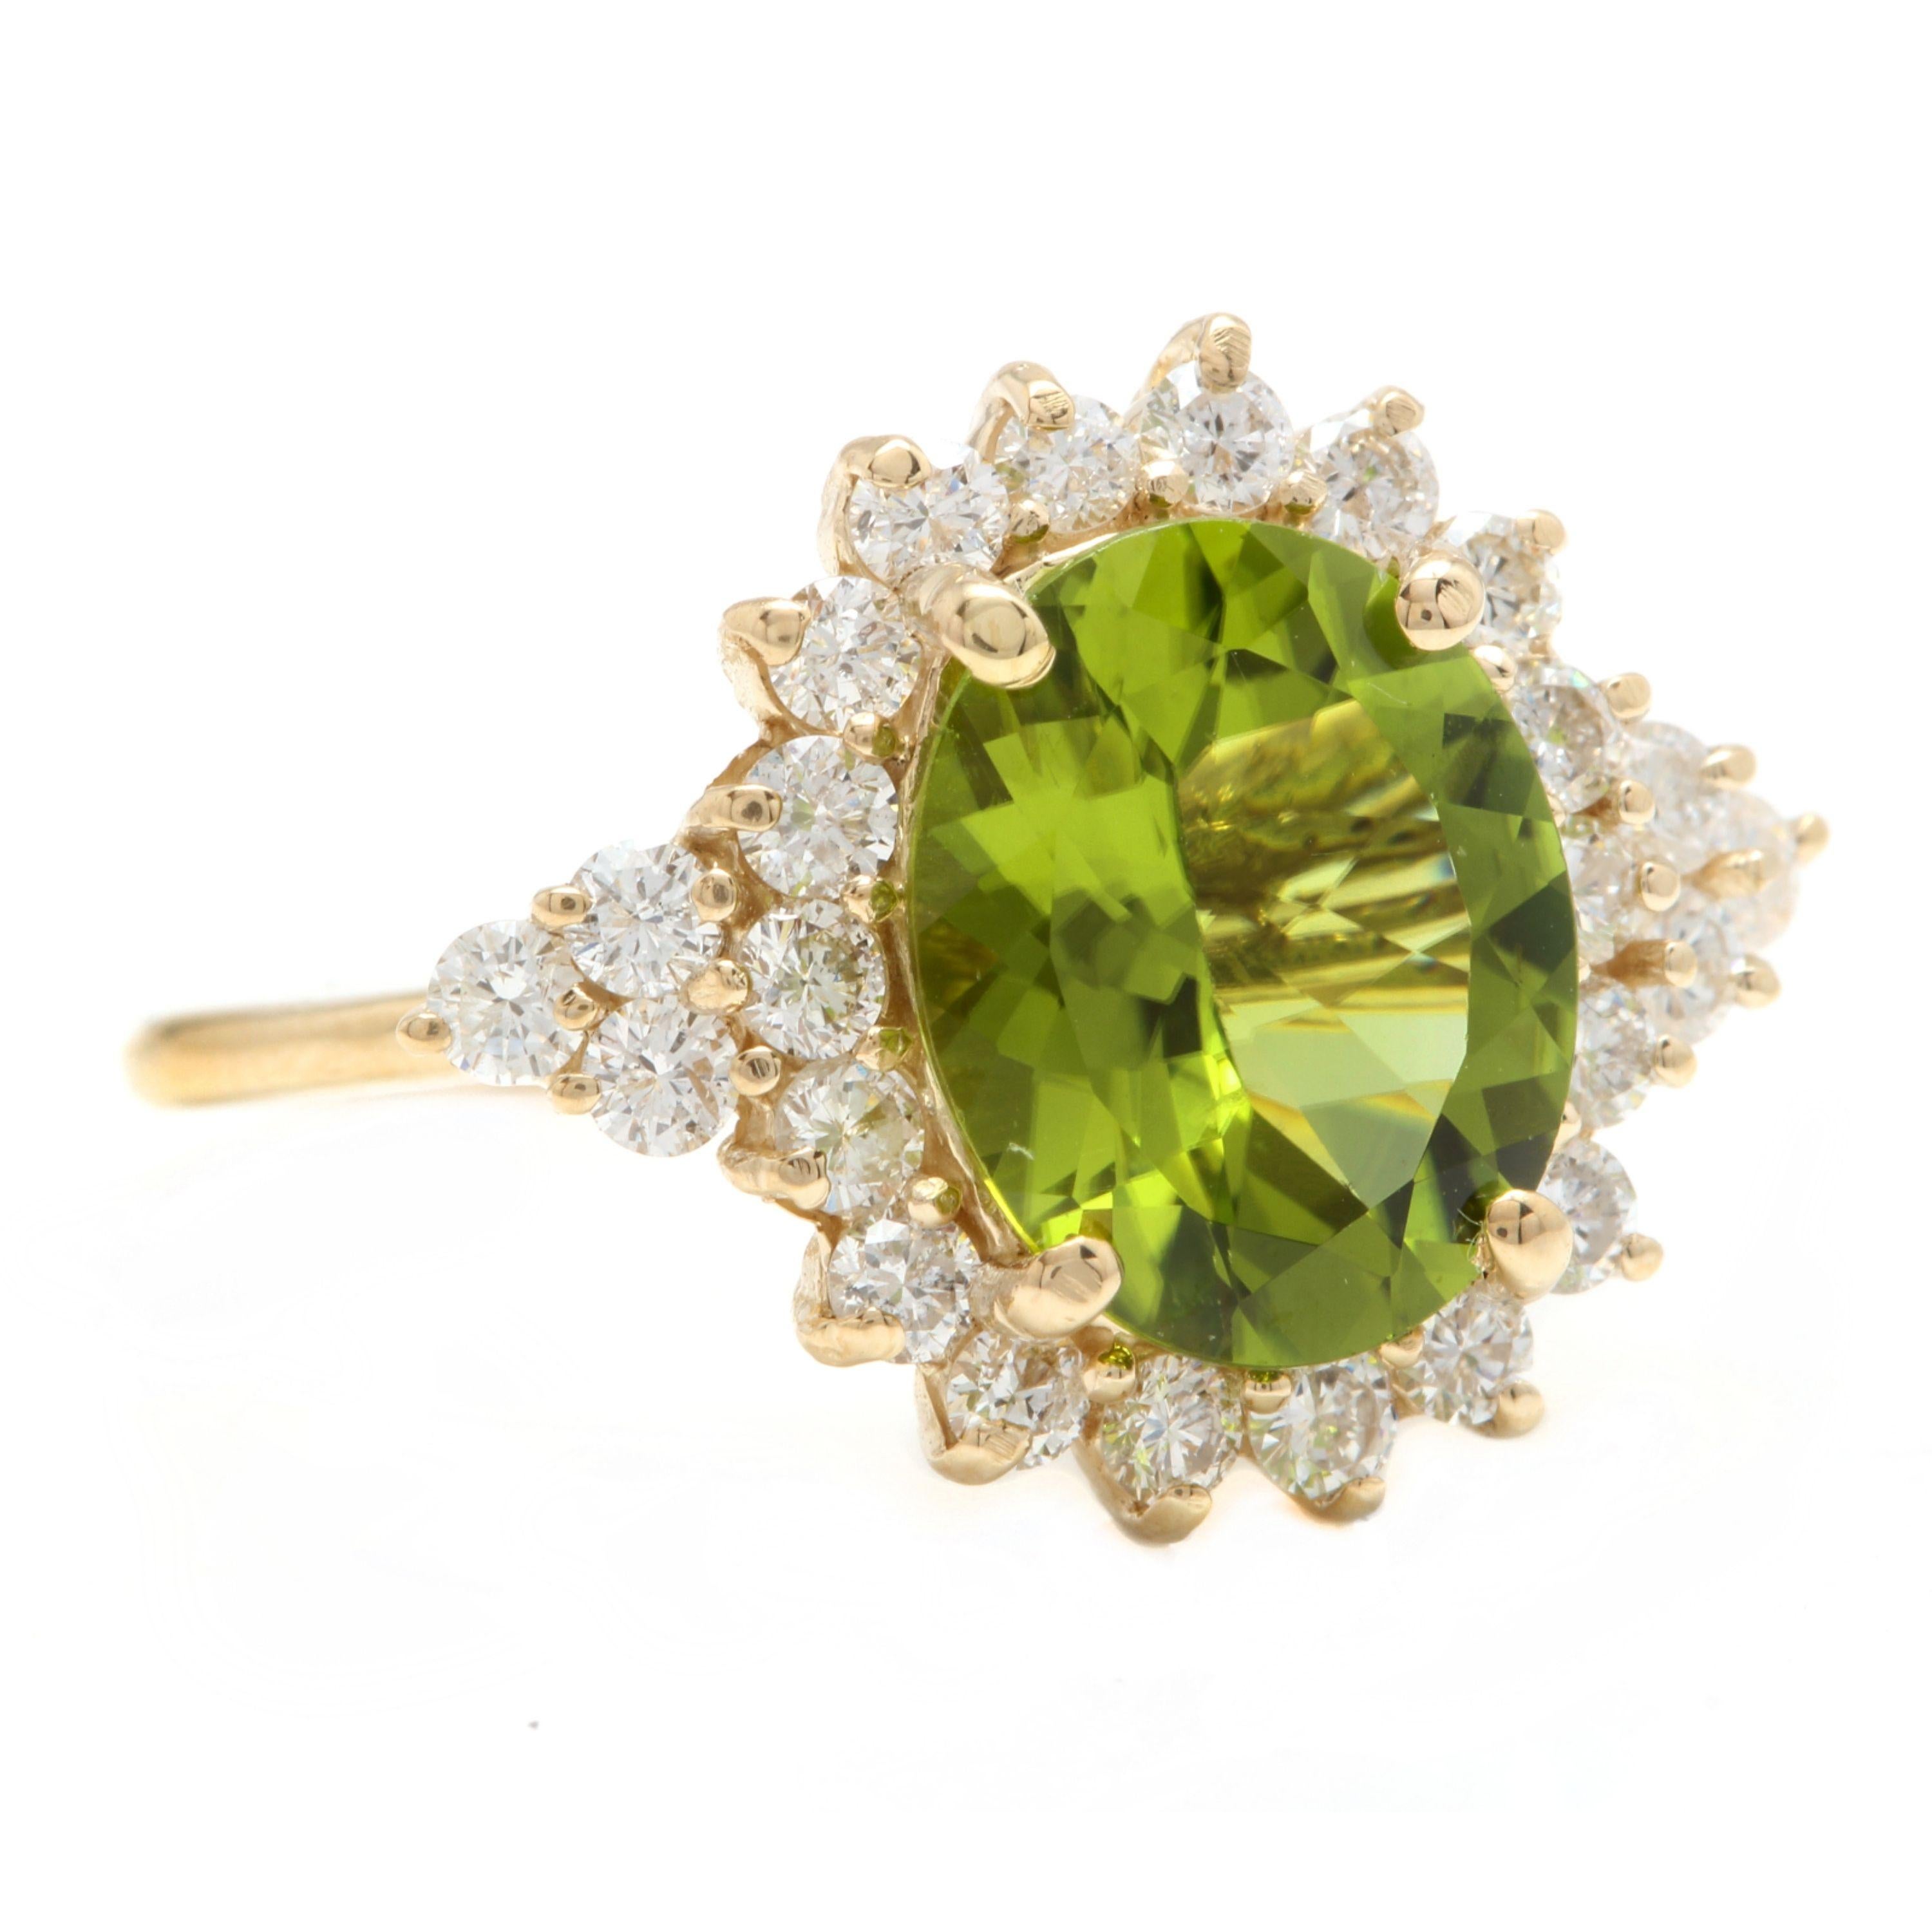 4.35 Carats Impressive Natural Peridot and Diamond 14K Yellow Gold Ring

Total Natural Peridot Weight is: Approx. 3.50 Carats

Peridot Measures: Approx. 11.00 x 9.00mm

Natural Round Diamonds Weight: Approx. 0.85 Carats (color G-H / Clarity